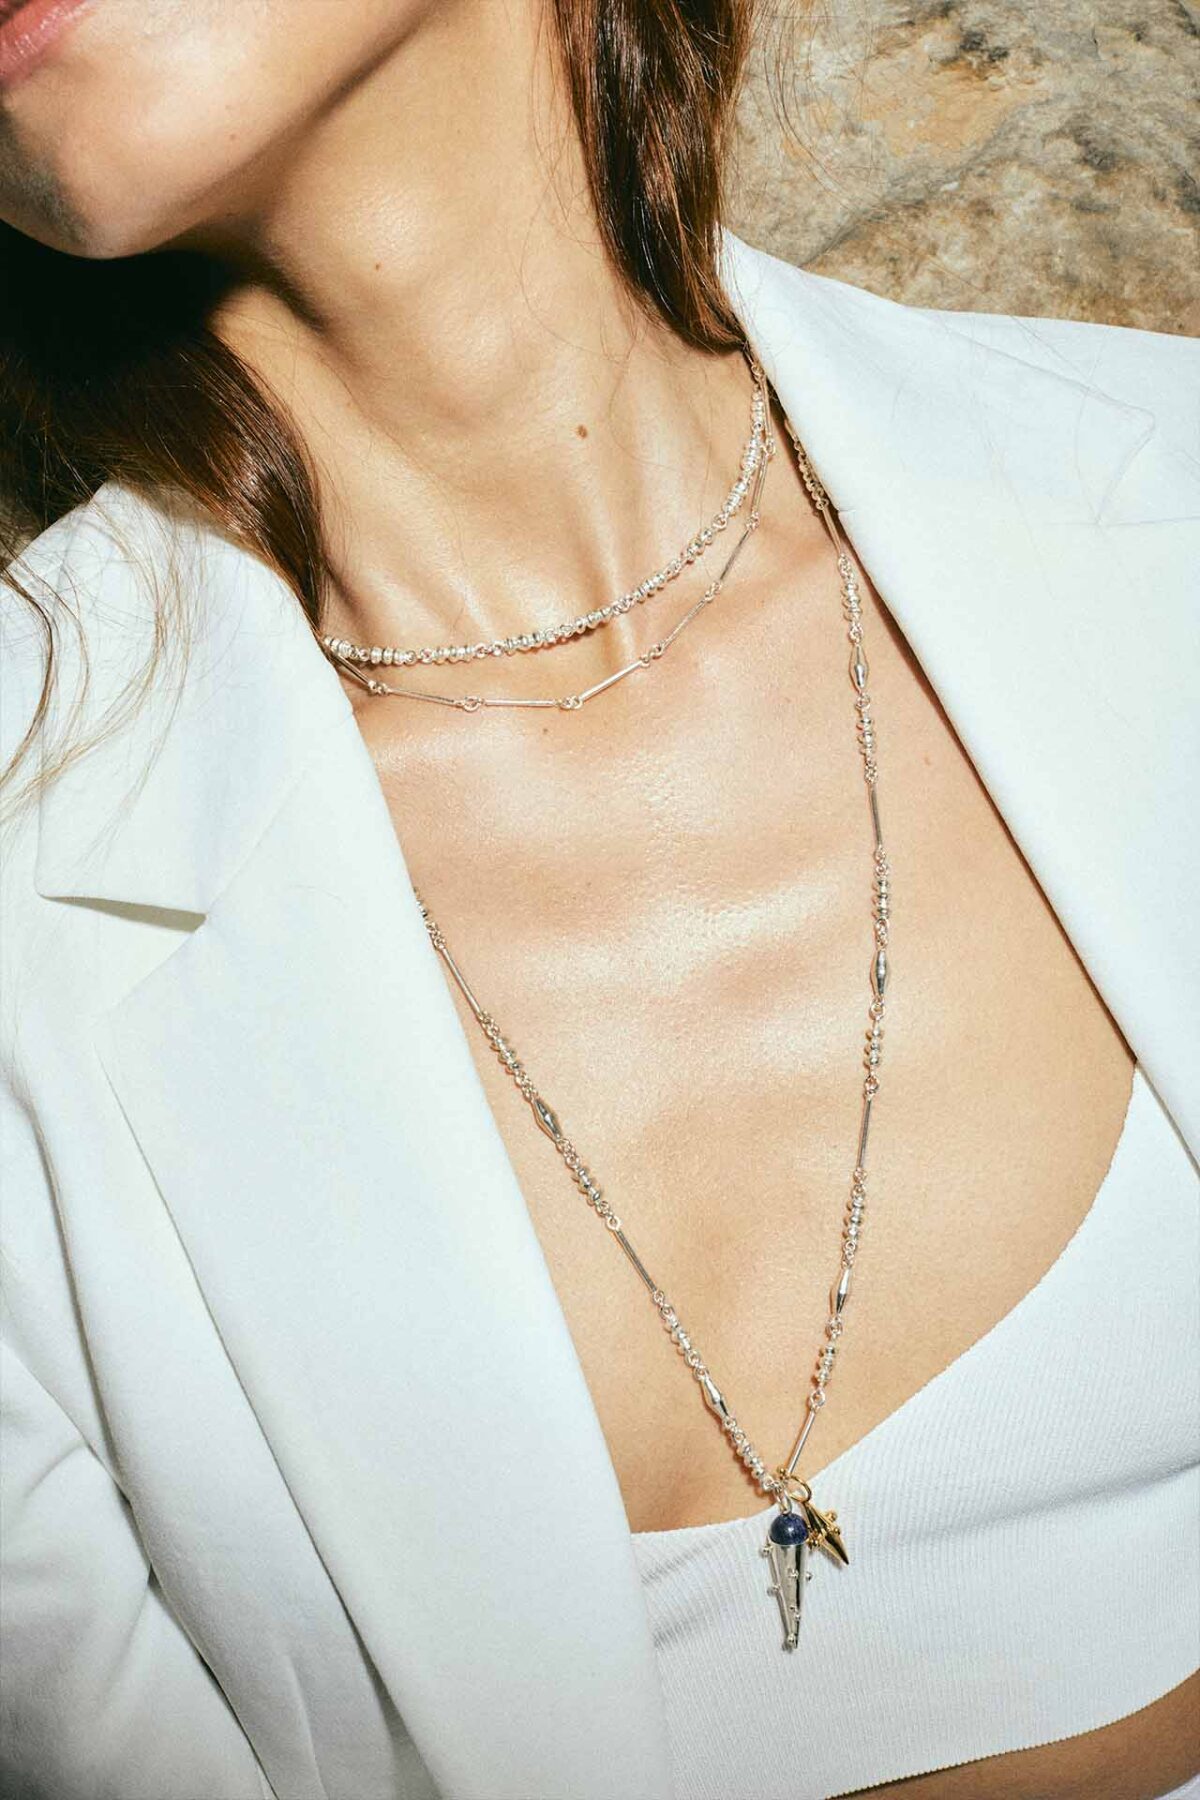 juana del rio modeling a white blazer and crop top and 3 silver chains with two hanging cone shapes pendants in silver and gold, colombian brand invited to aysha bilgrami jewelry pop up shop in bogota colombia